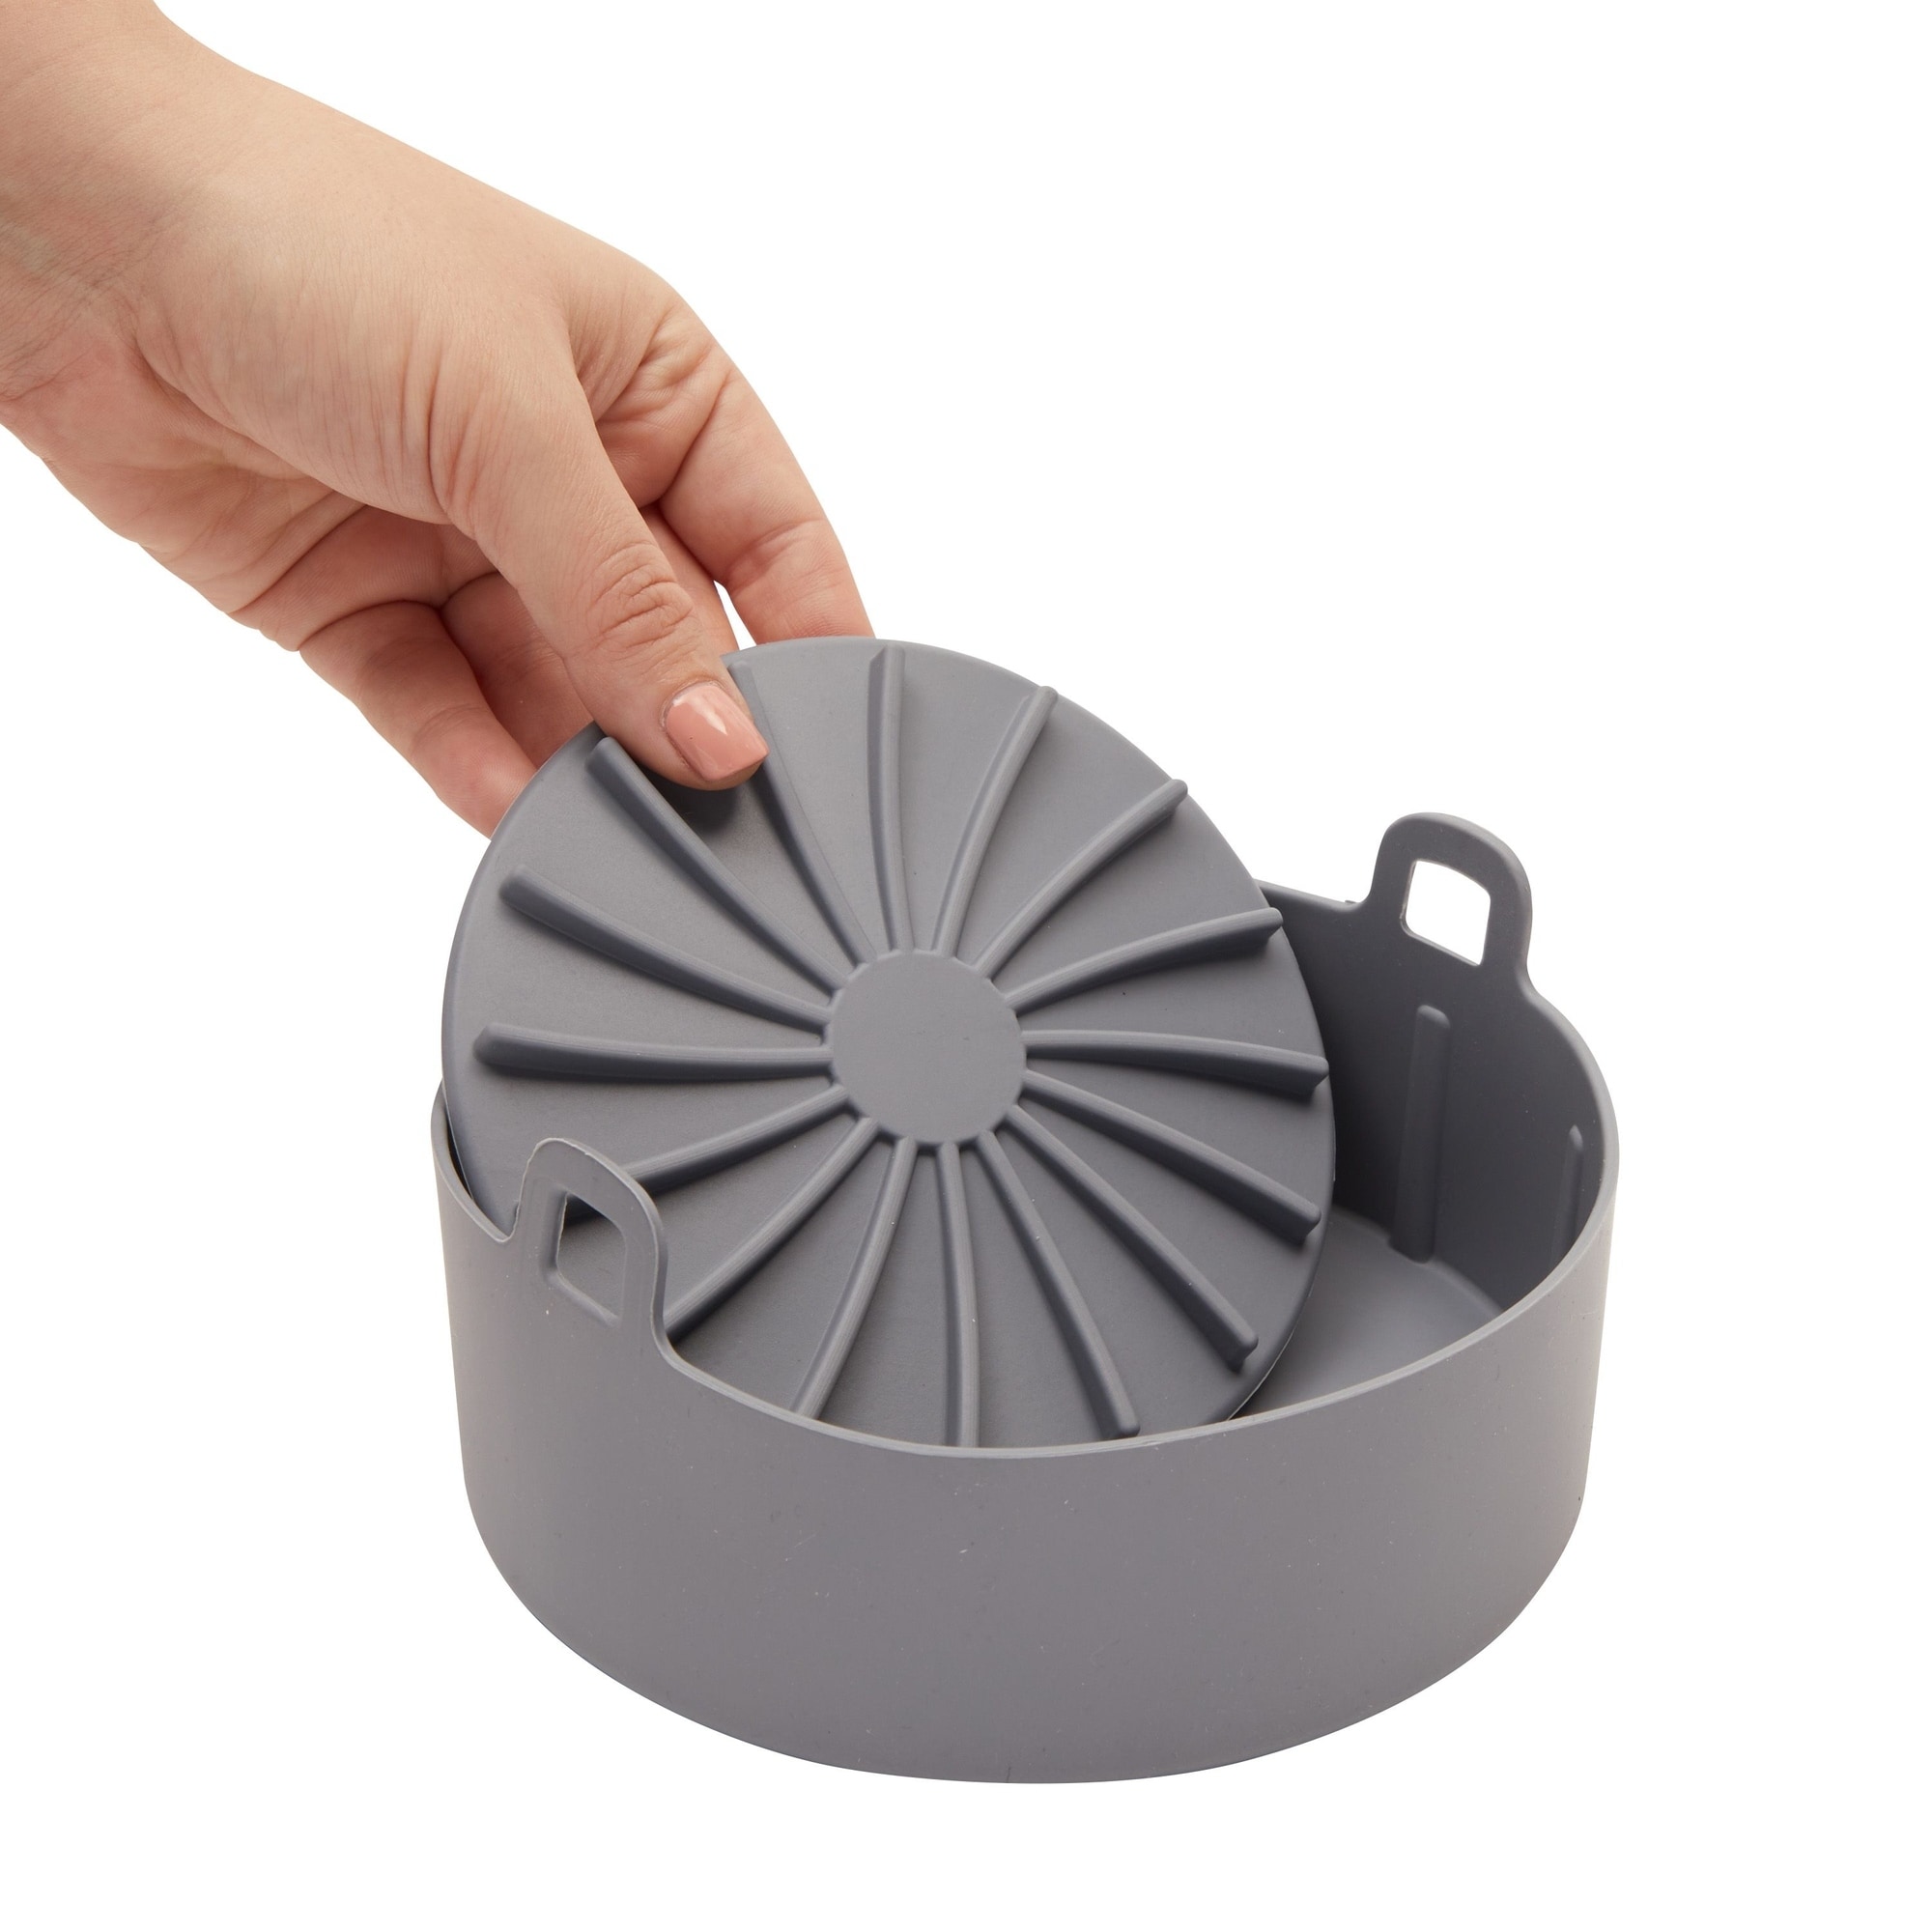 https://ak1.ostkcdn.com/images/products/is/images/direct/cebd5b4ff133937c5c31dd8e777f24135455ea1e/4-Piece-Set-Silicone-Pot-Basket-with-Handles%2C-Brush%2C-Tongs-for-Air-Fryer-Liner-%286.3-In%2C-Gray%29.jpg